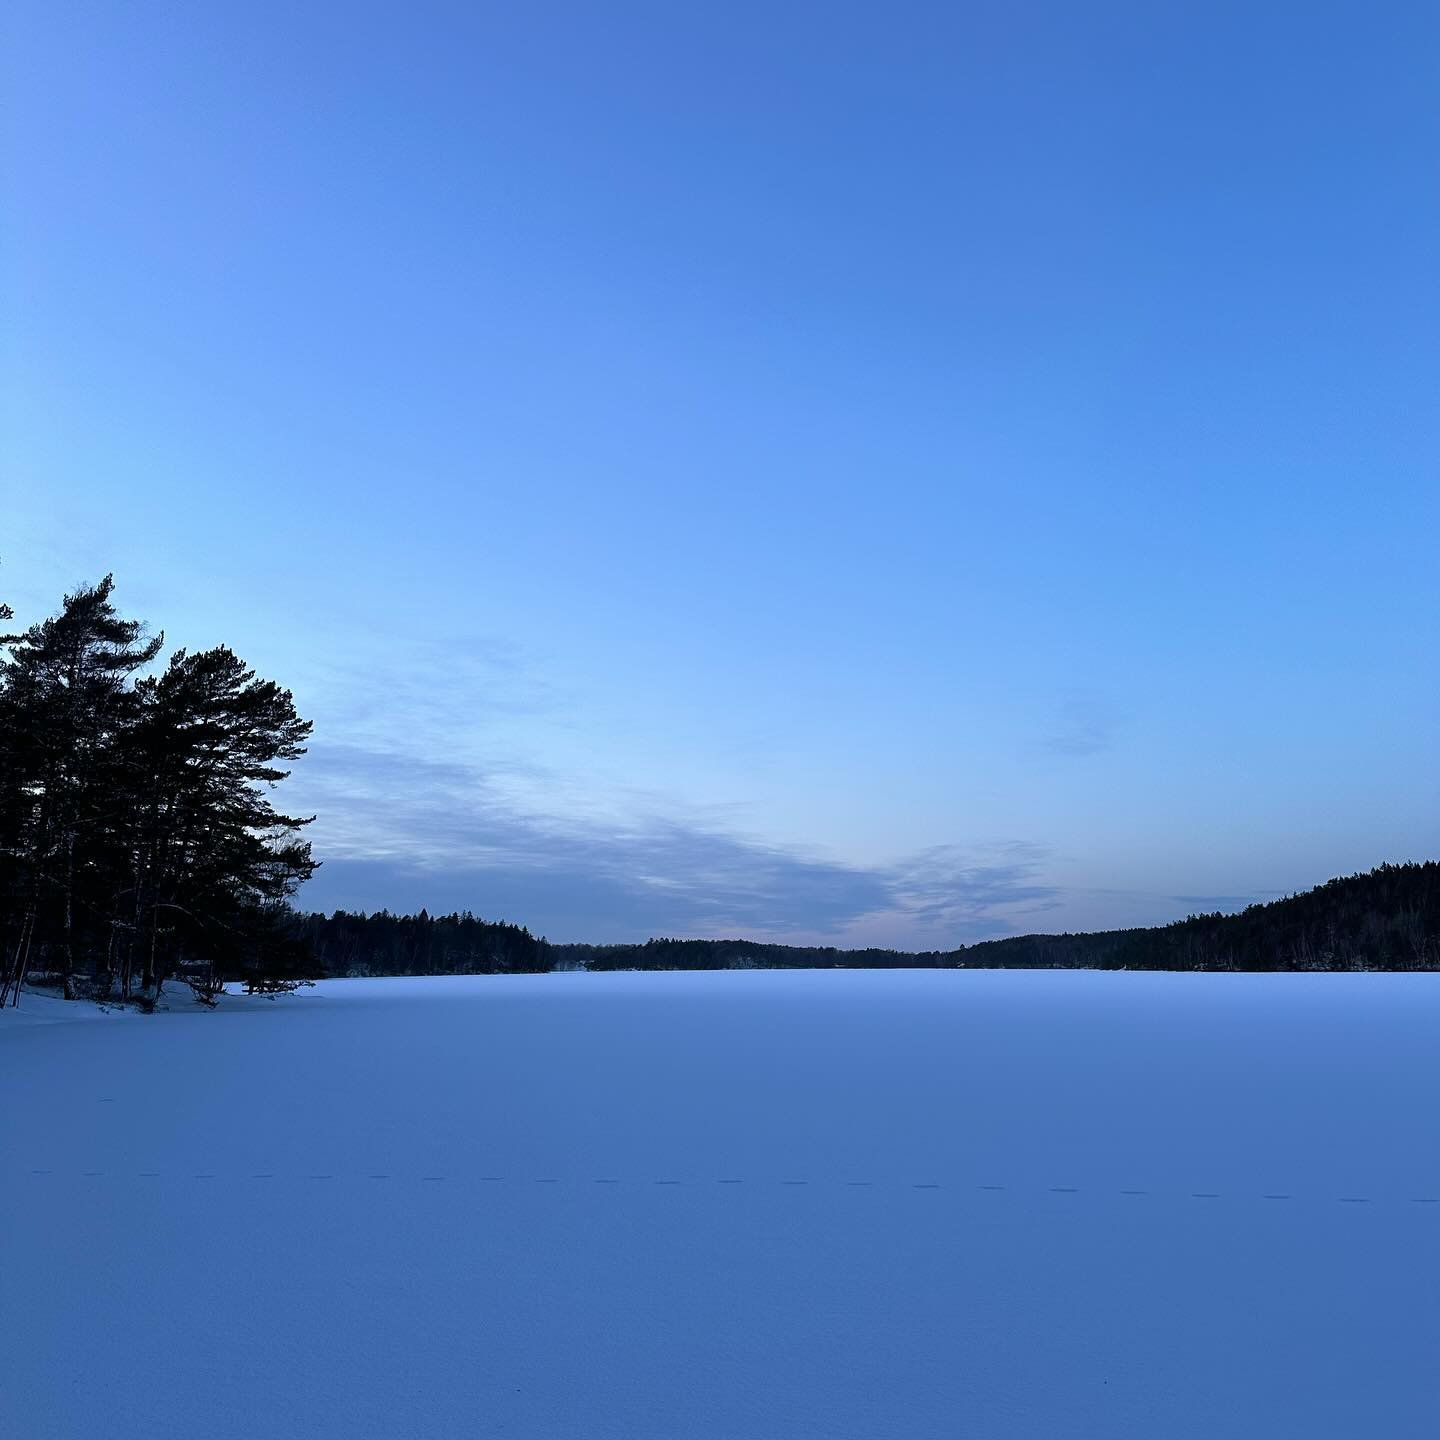 If you grow up in Georgia and eventually move to Sweden you have to take a photo of every frozen lake you encounter. It&rsquo;s just one of the rules